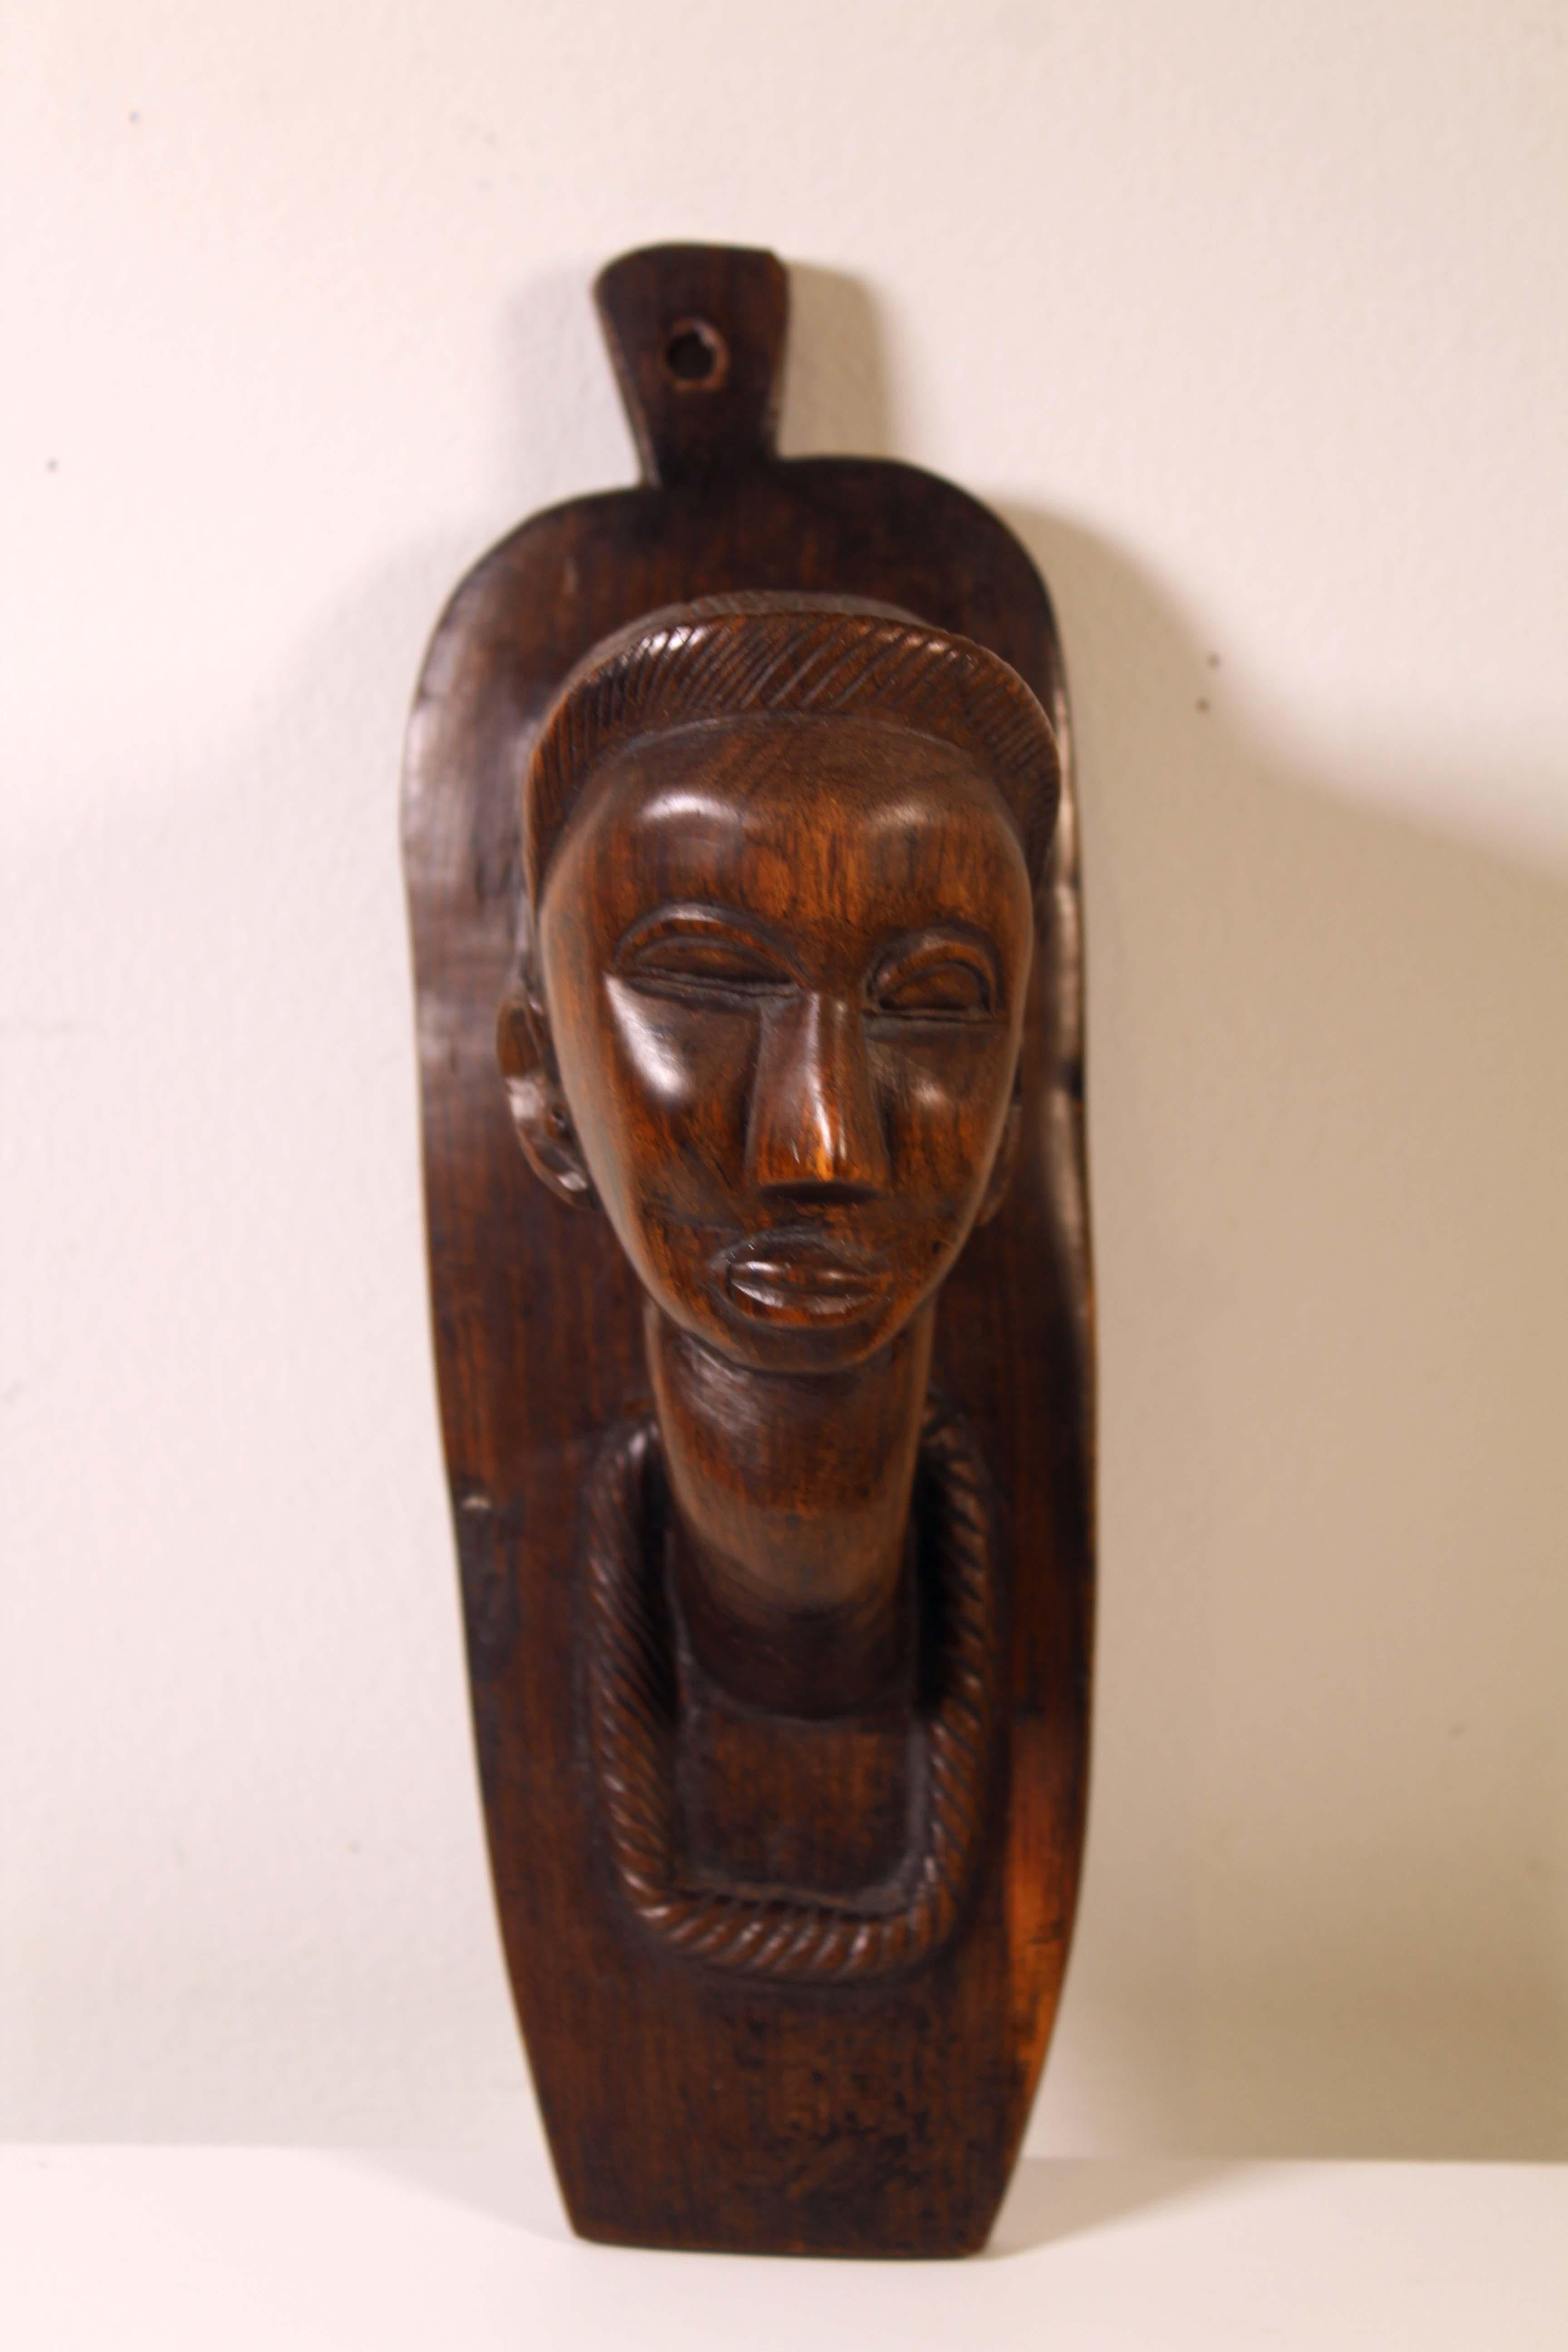 A fascinating set of African wood carvings, including a lidded vessel from Ebony Shona from Malawian. From a private collection. Dimensions: 7”h x 6”dia / 6.5”h x 2.5”w x 1.5”d / 10”h x 3.5”w x 4”d. In very good condition.
 